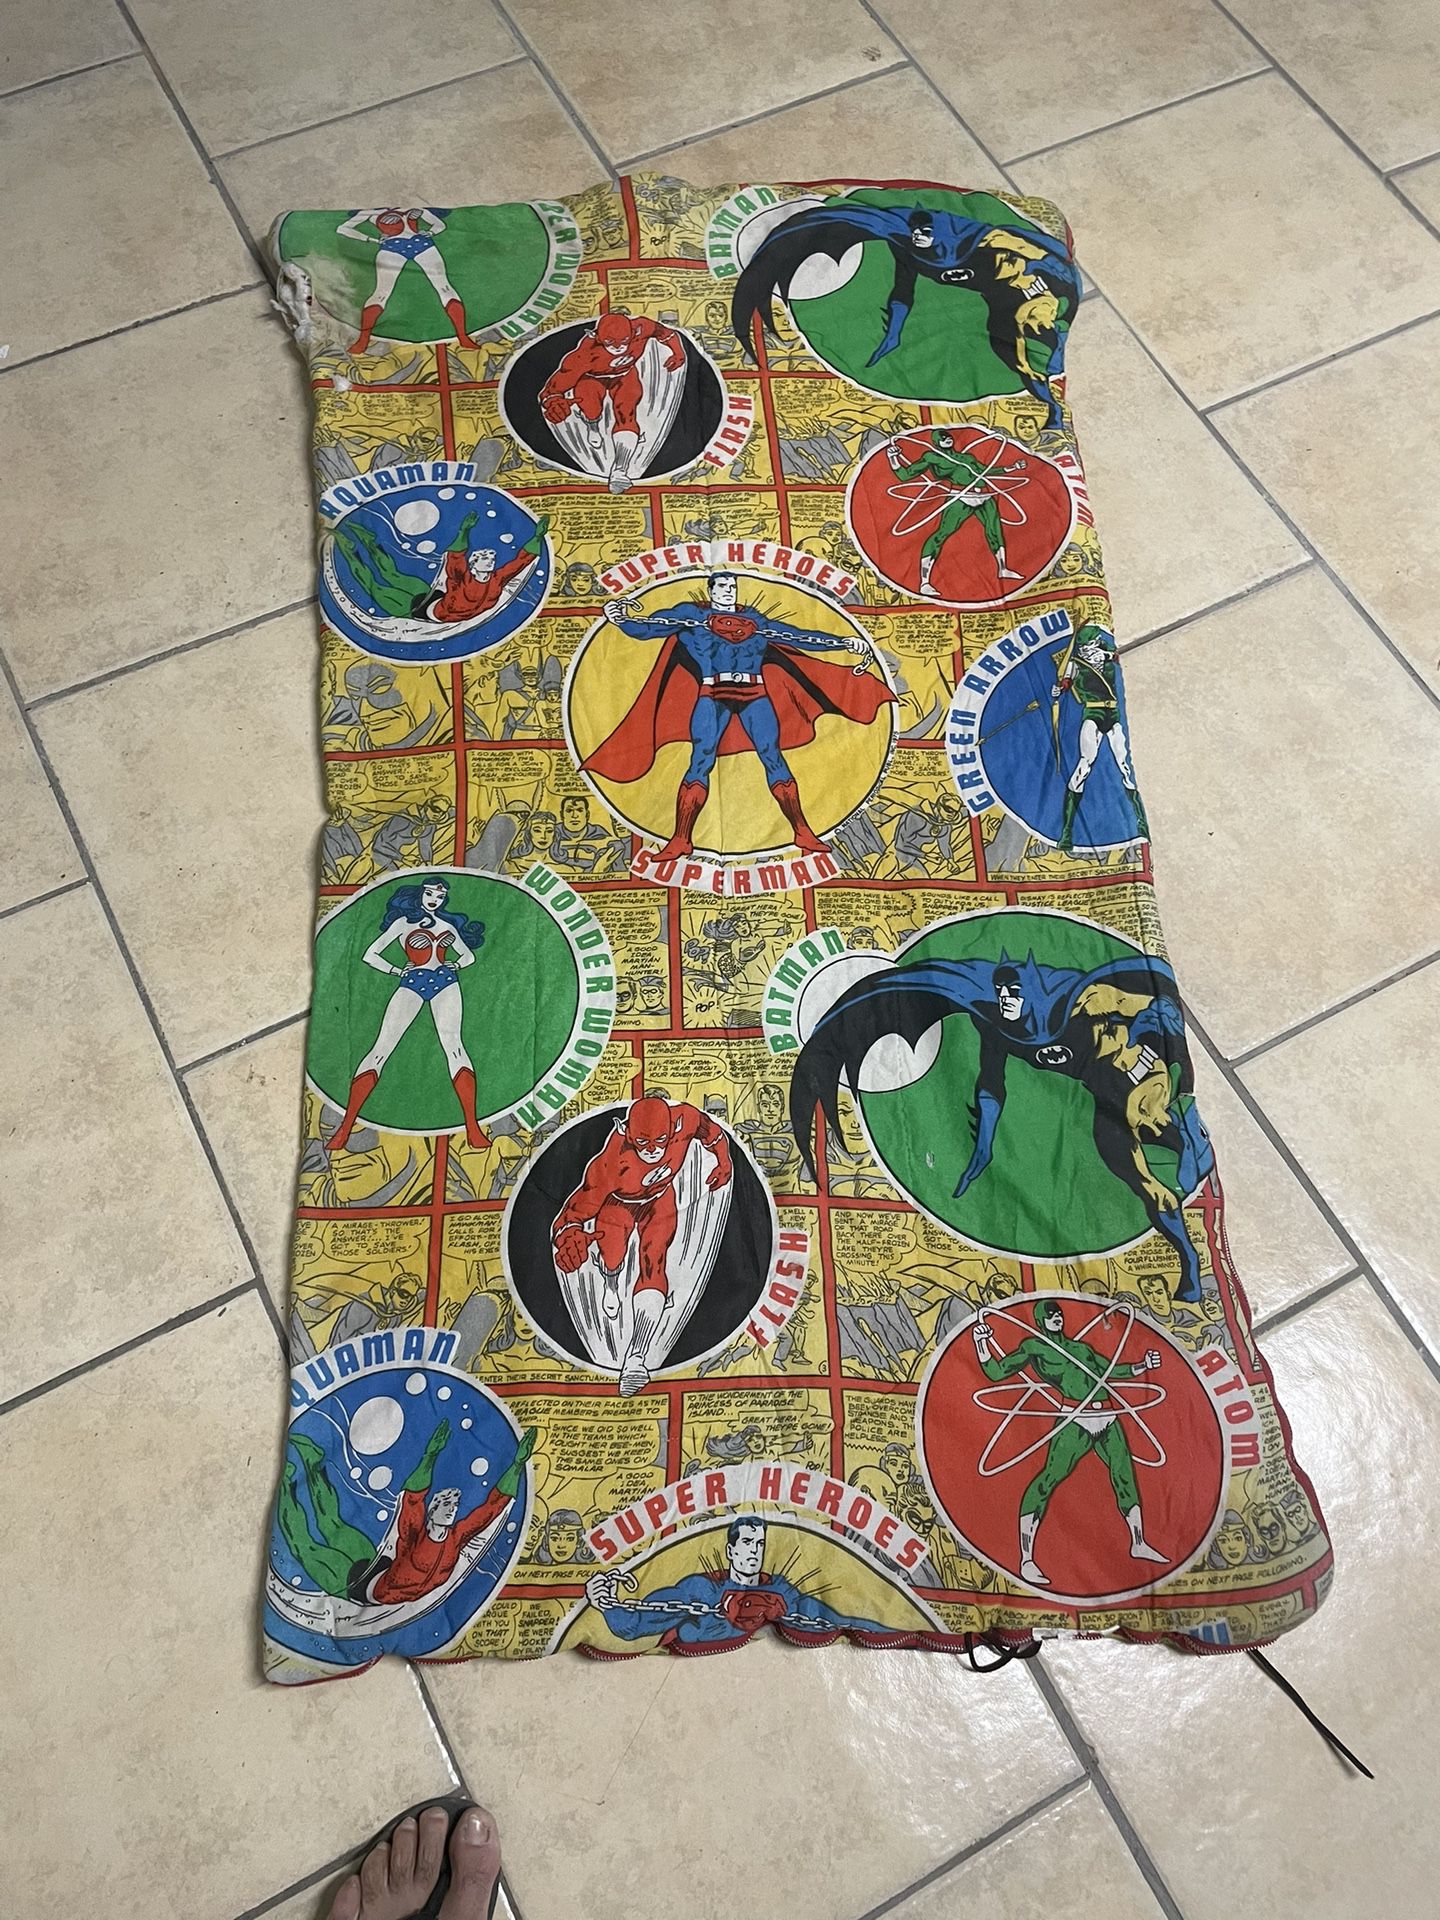 Sleeping Bag From 1975 To 1980